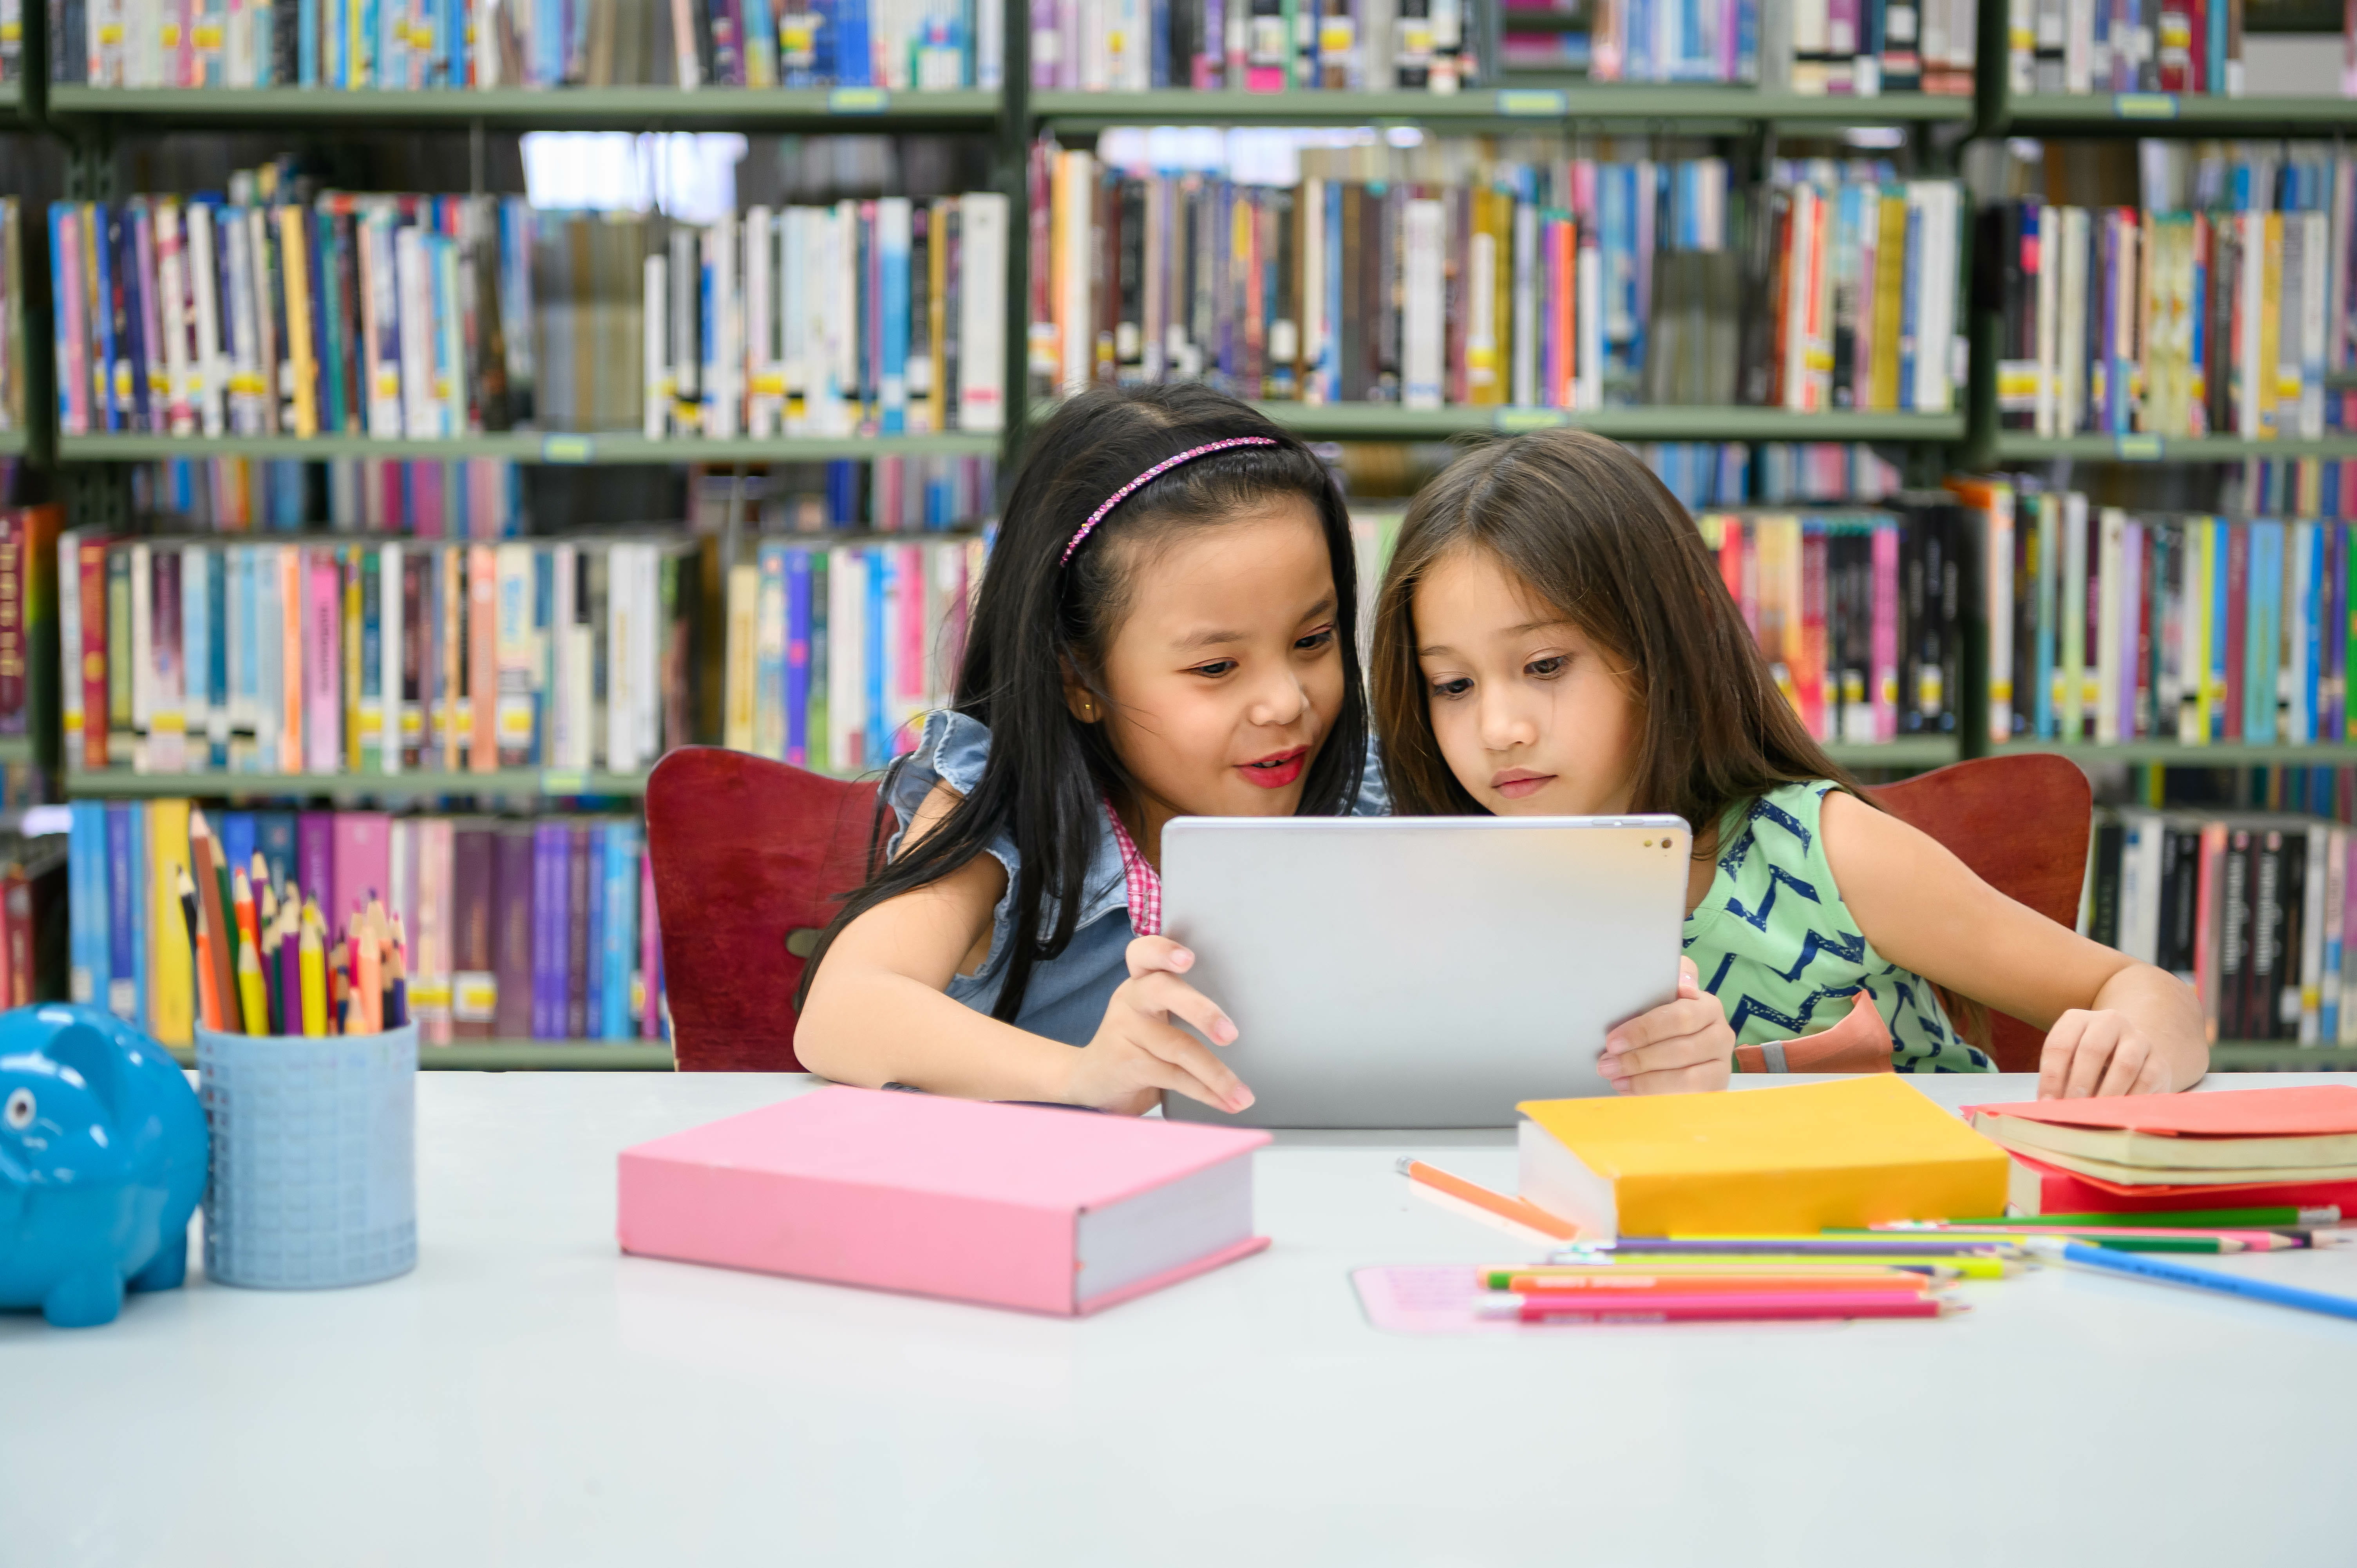 Two elementary students collaborate on a digital assignment at their school's library.